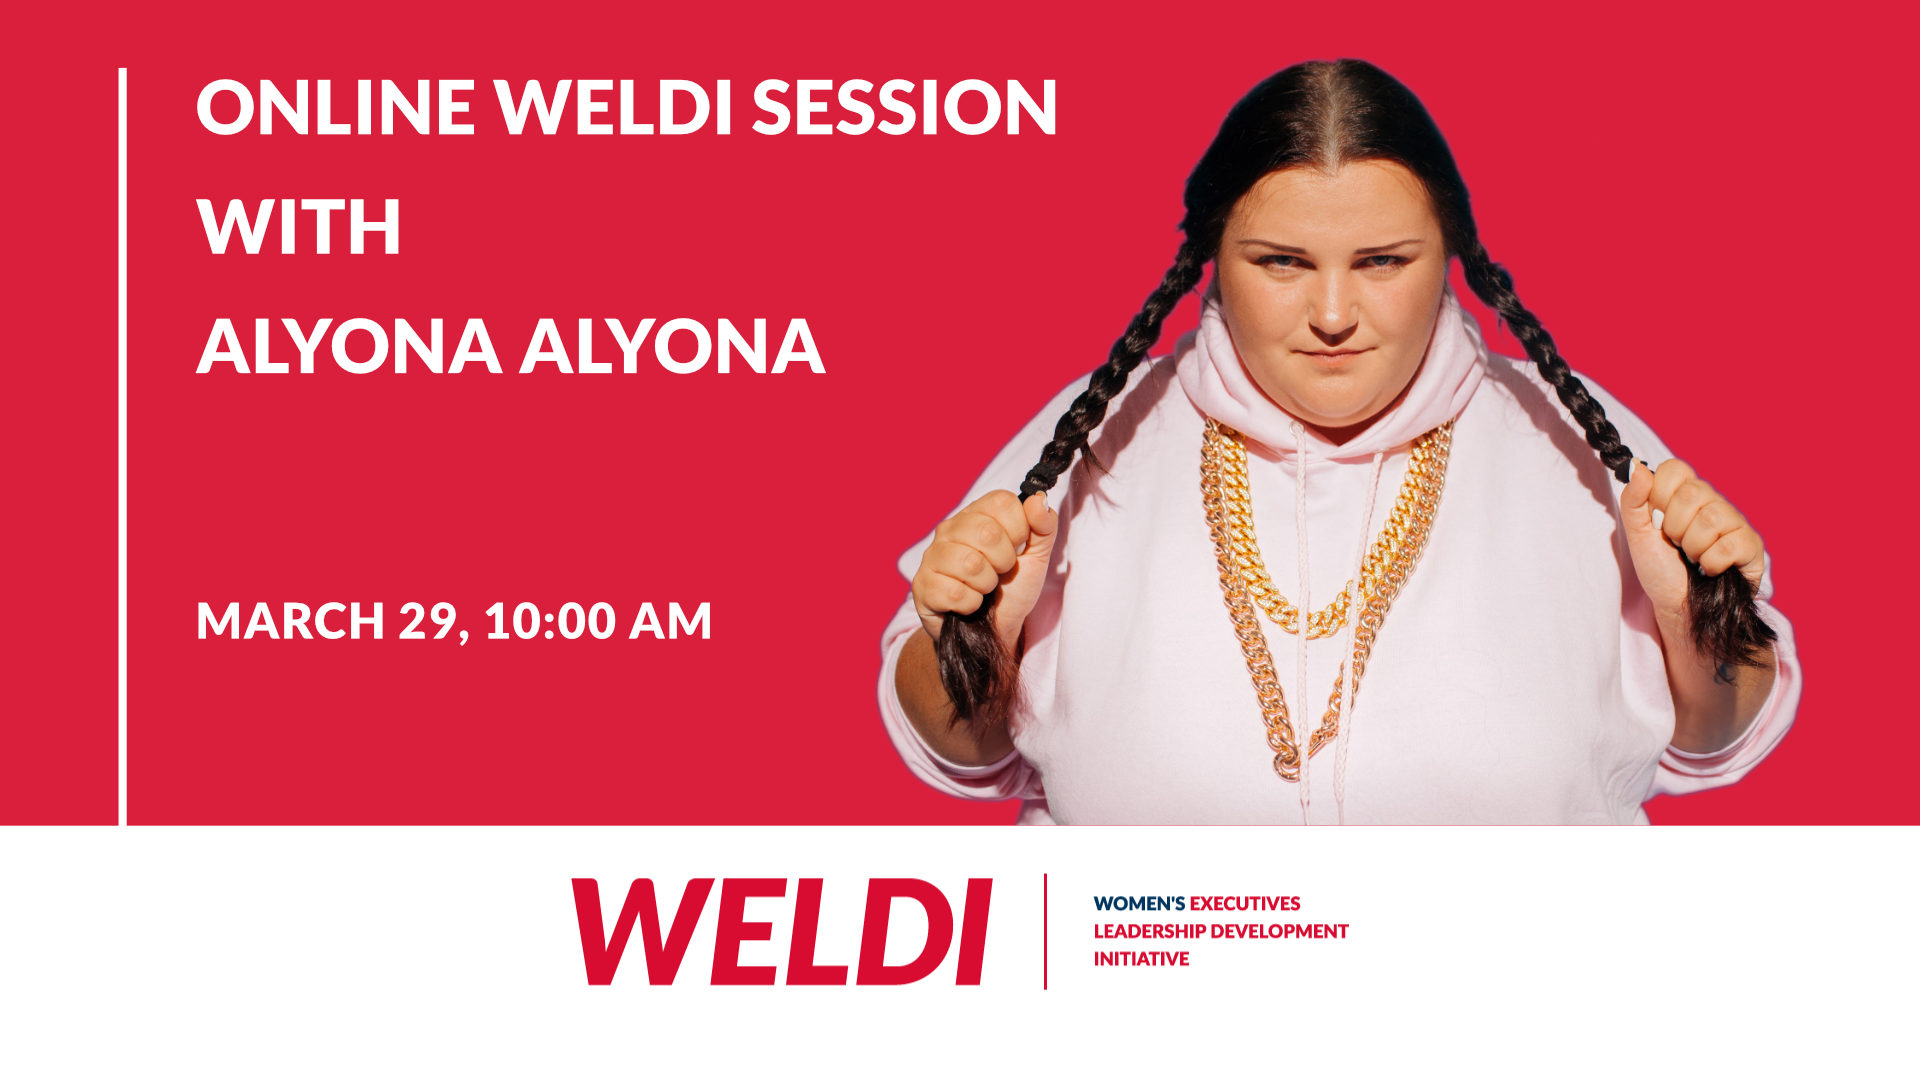 Online WELDI Session with Alyona Alyona, Ukrainian Rapper and Songwriter